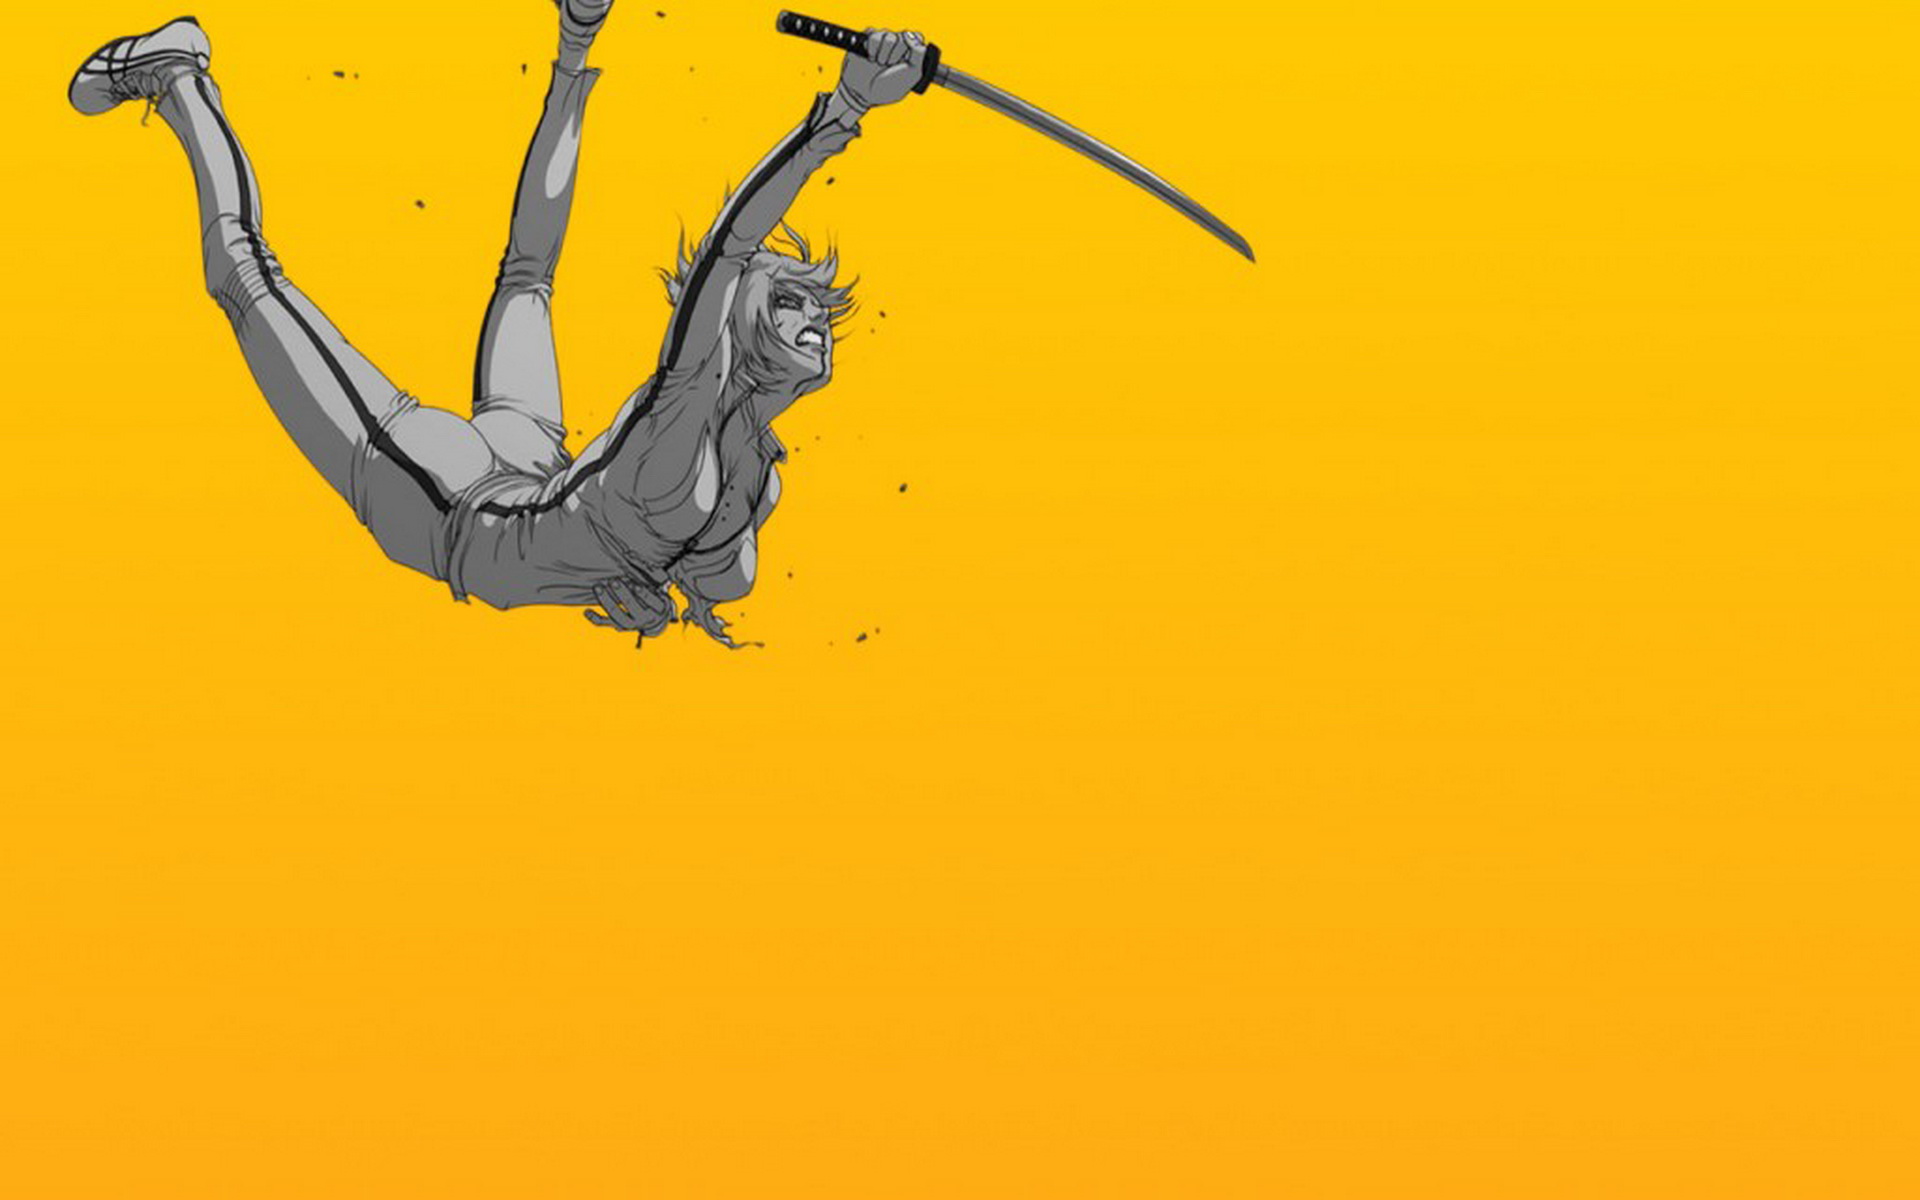 28 Kill Bill Images for Laptop   GsFDcY 1920x1200